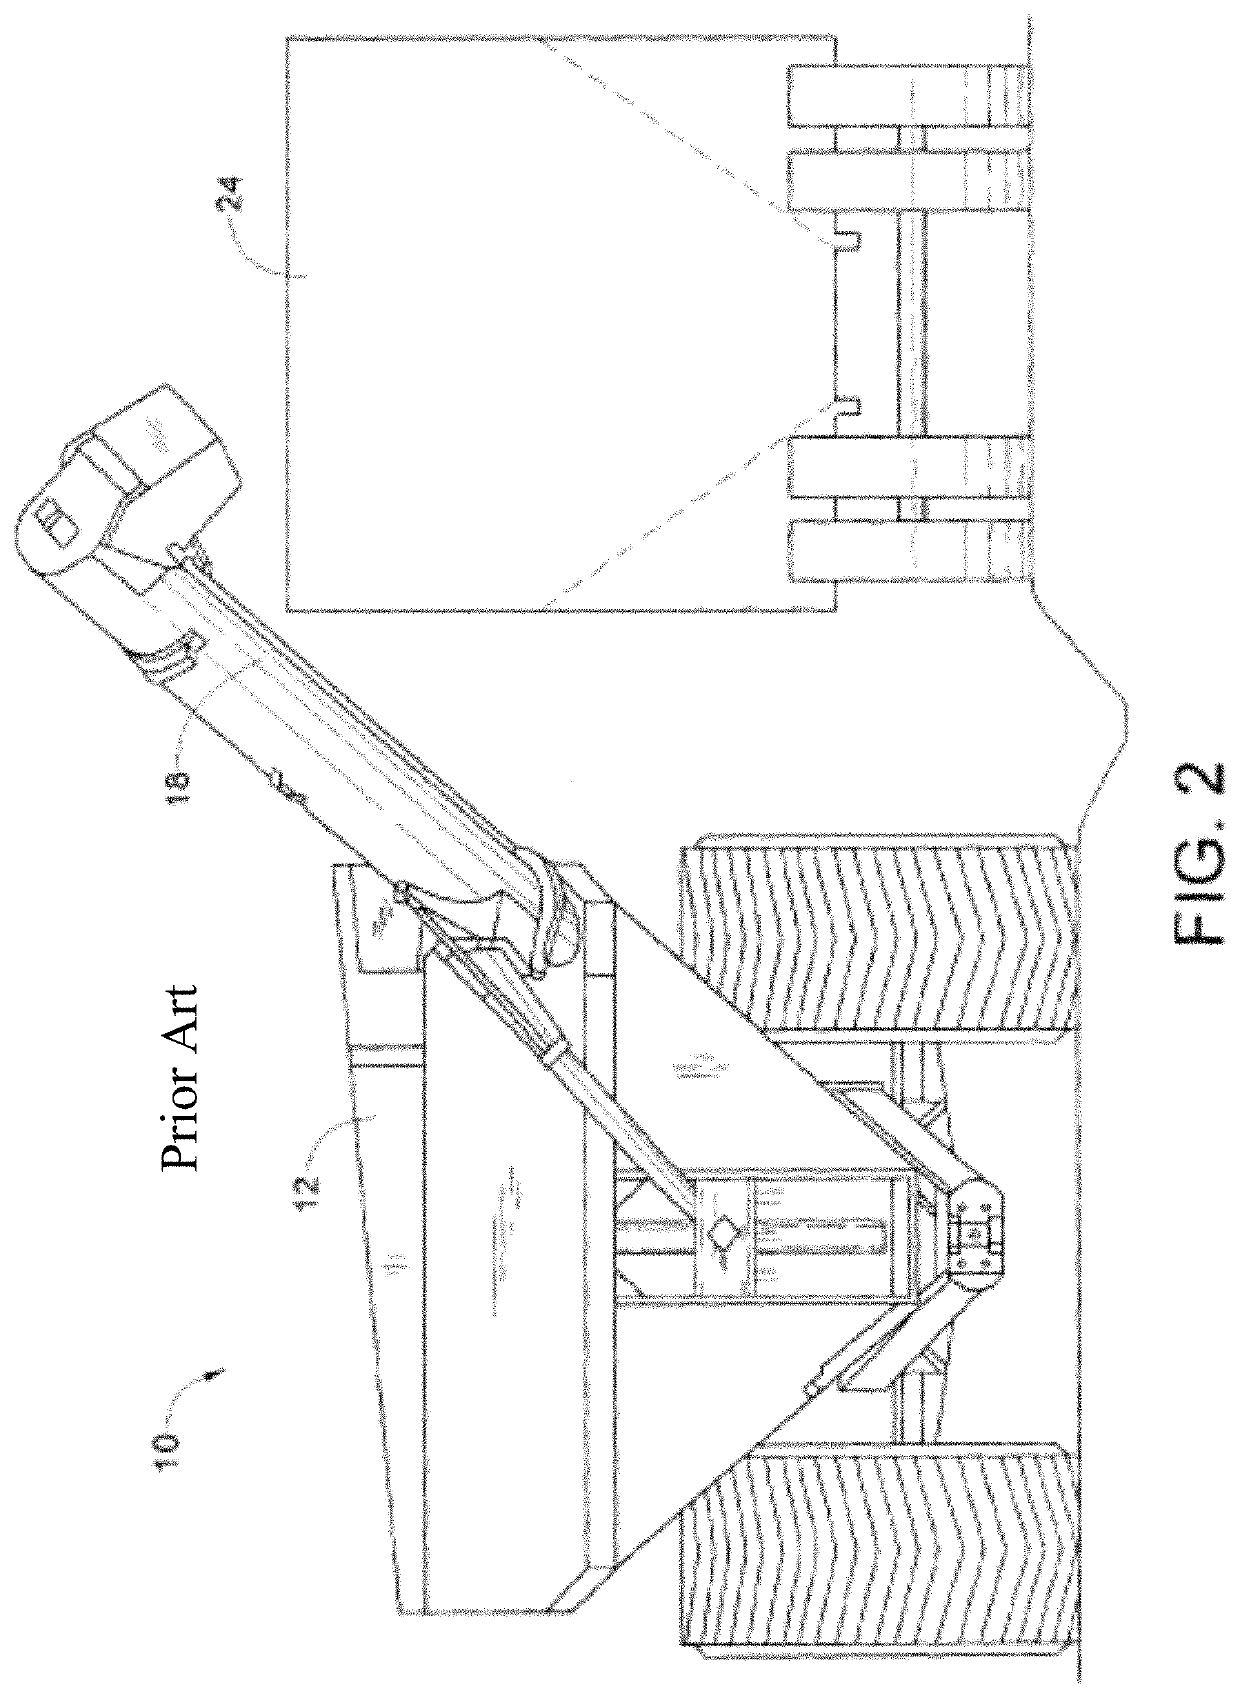 System and method for measuring grain cart weight